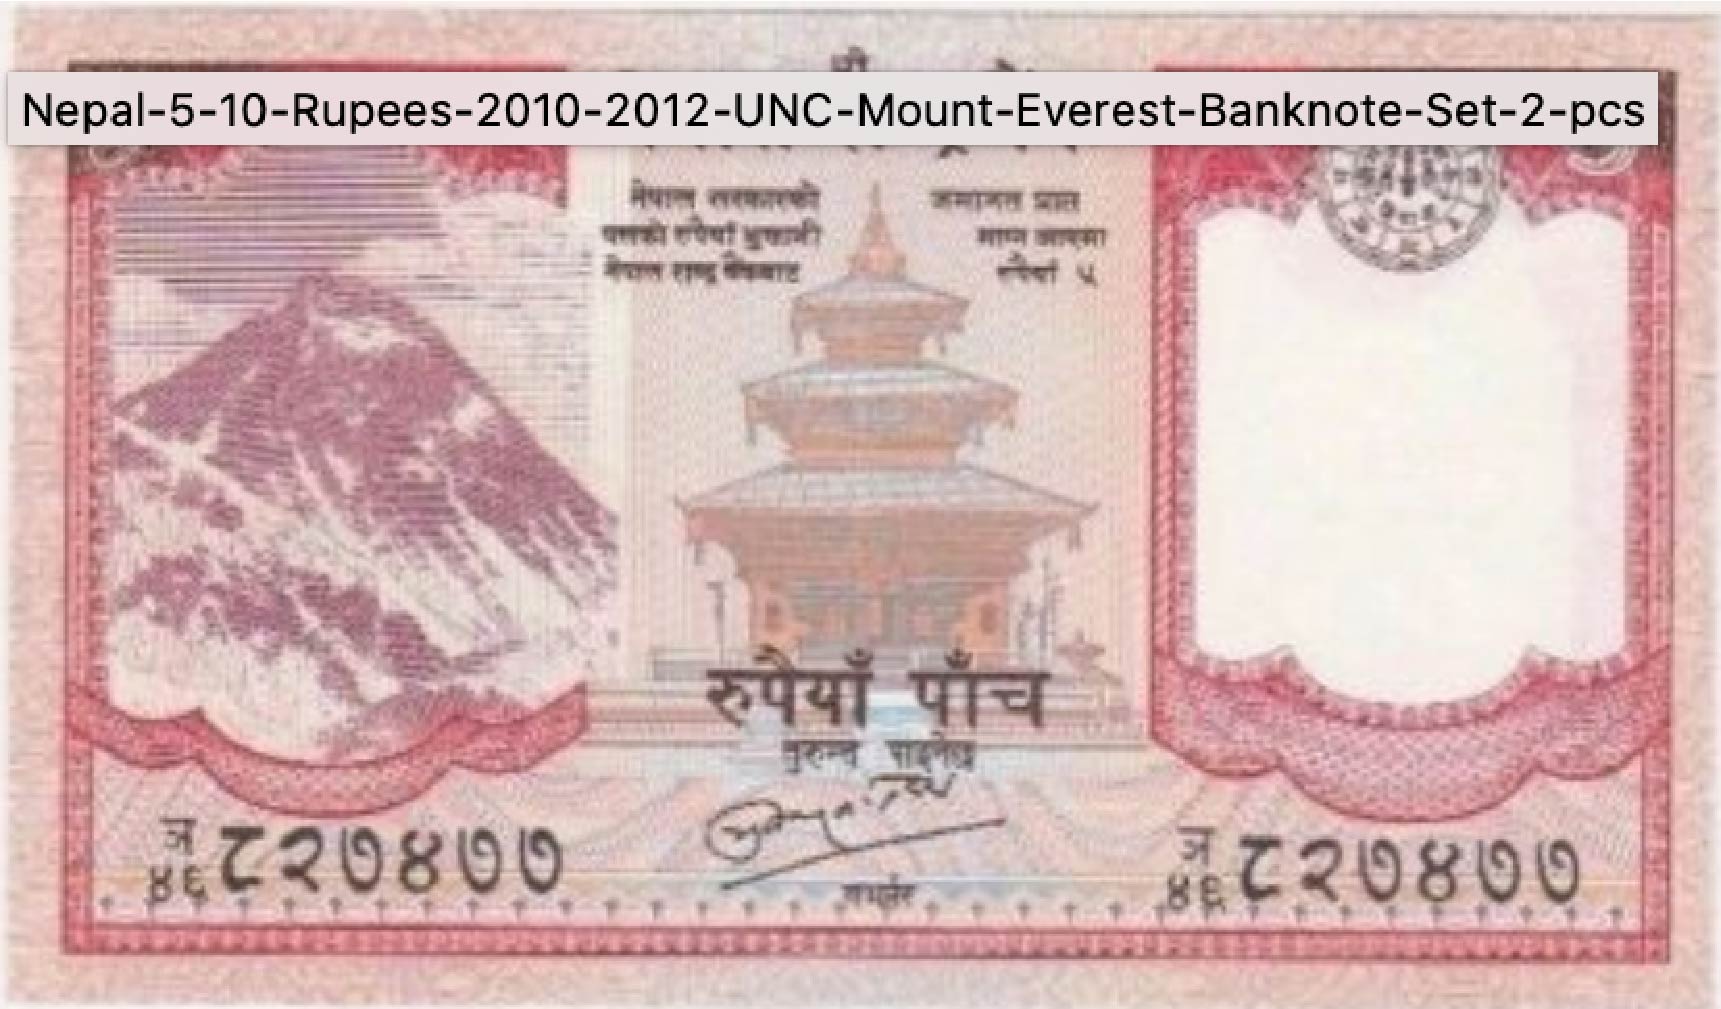 5 Nepalese Rupees banknote (Mount Everest)